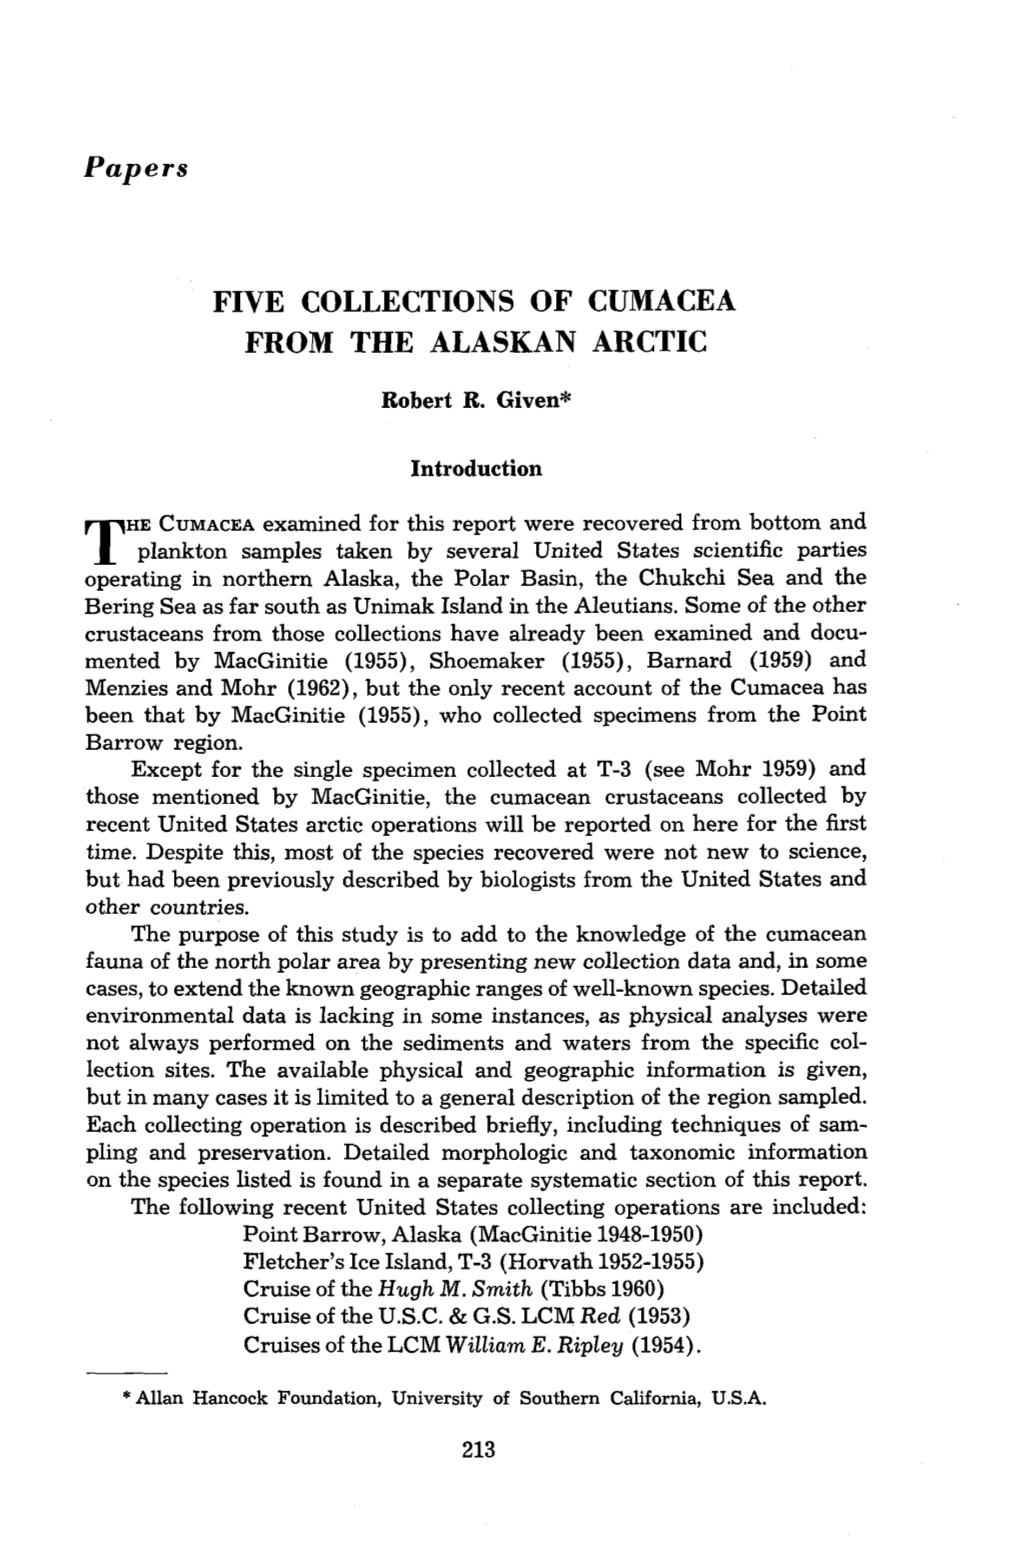 Five Collections of Cumacea from the Alaskan Arctic